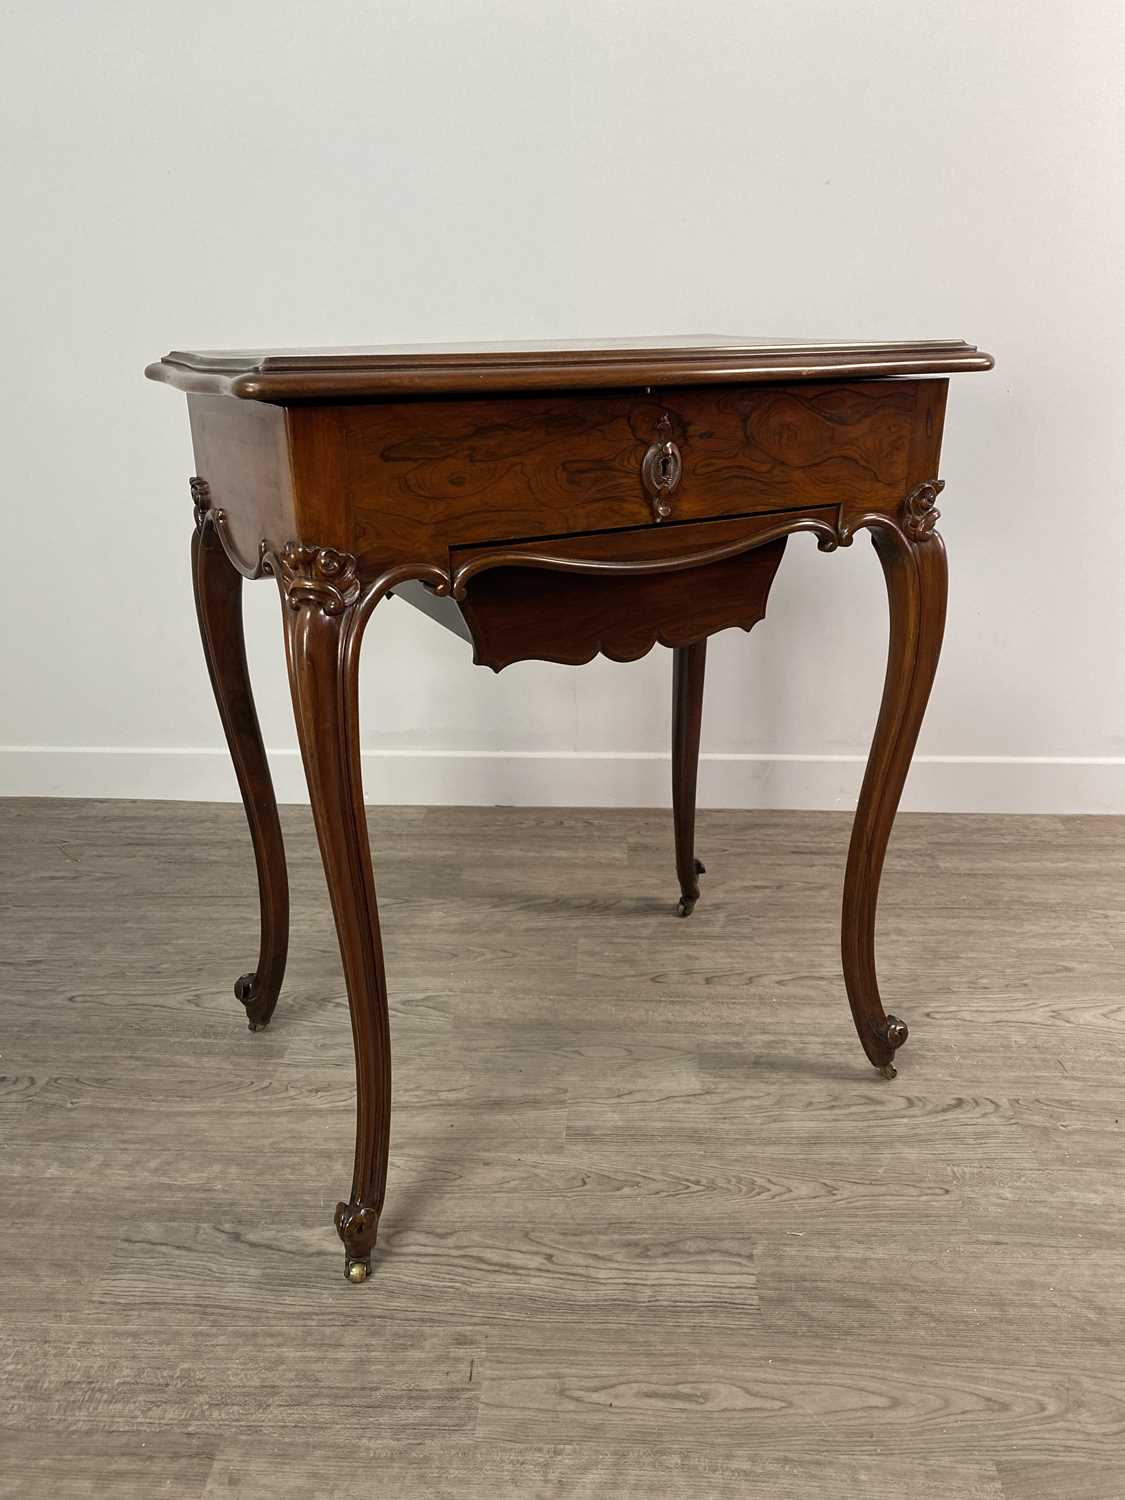 Lot 1661 - A VICTORIAN ROSEWOOD NEEDLEWORK TABLE